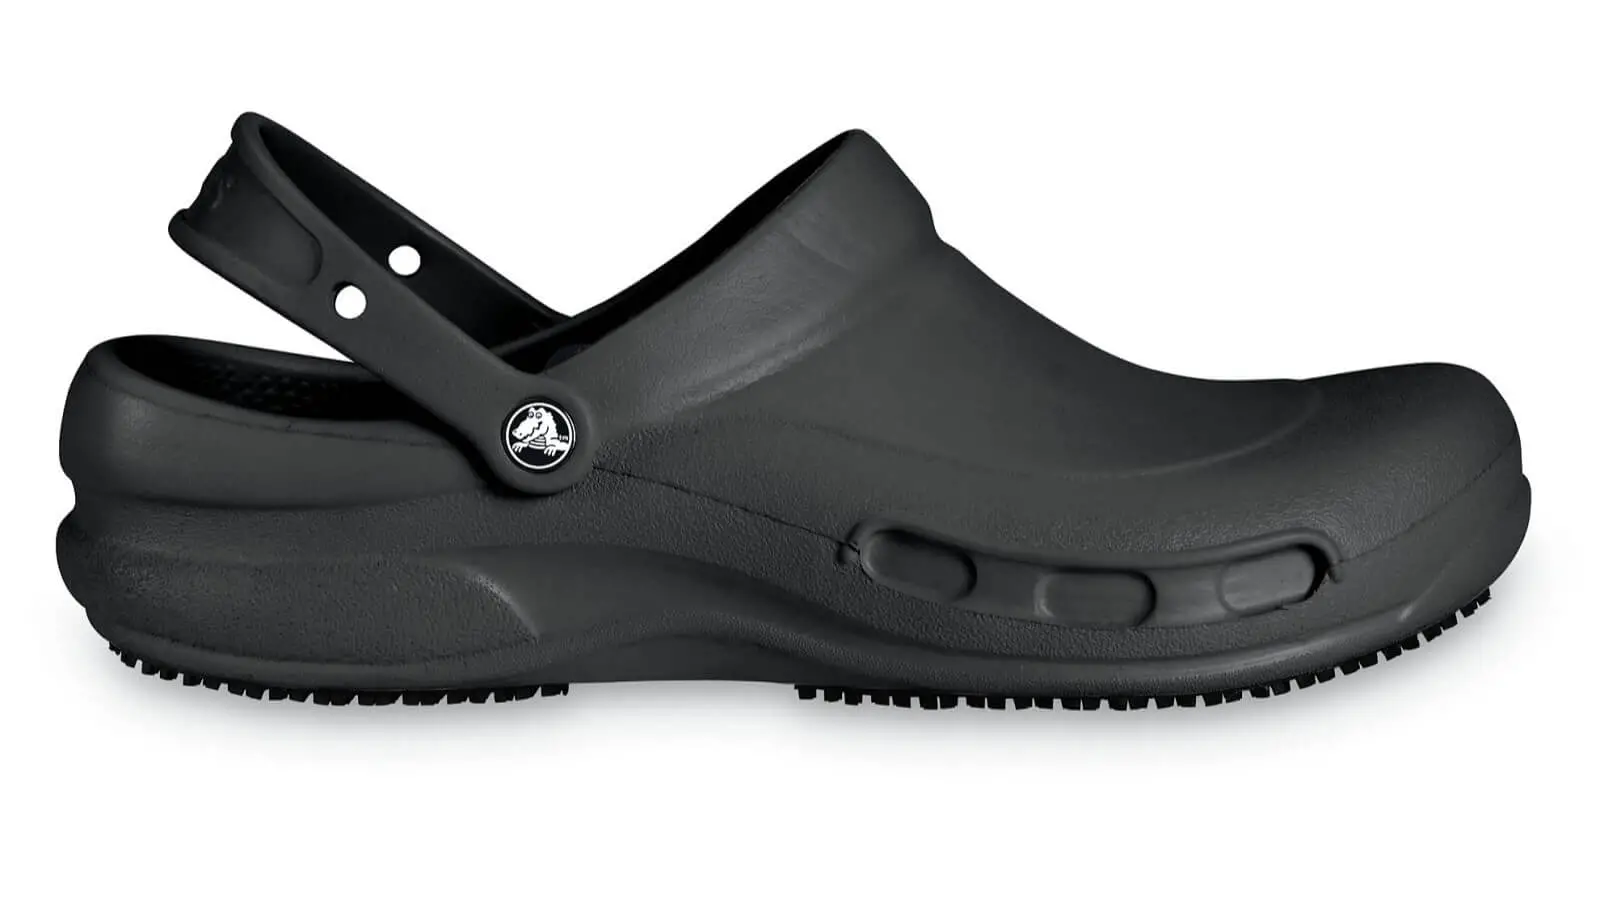 Crocs bistro clog with heel strap. Non-slip trade for greasy and wet kitchen floors